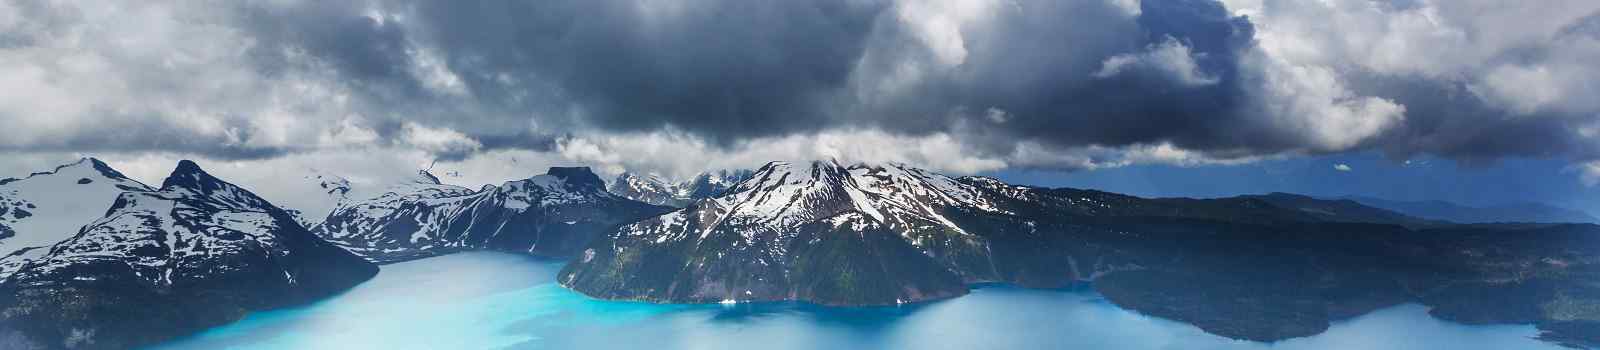 WILD-WEST Hike to turquoise waters of picturesque Garibaldi Lake near Whistler  BC  Canada  Very popular hike destination in British Columbia  shutterstock 523904203